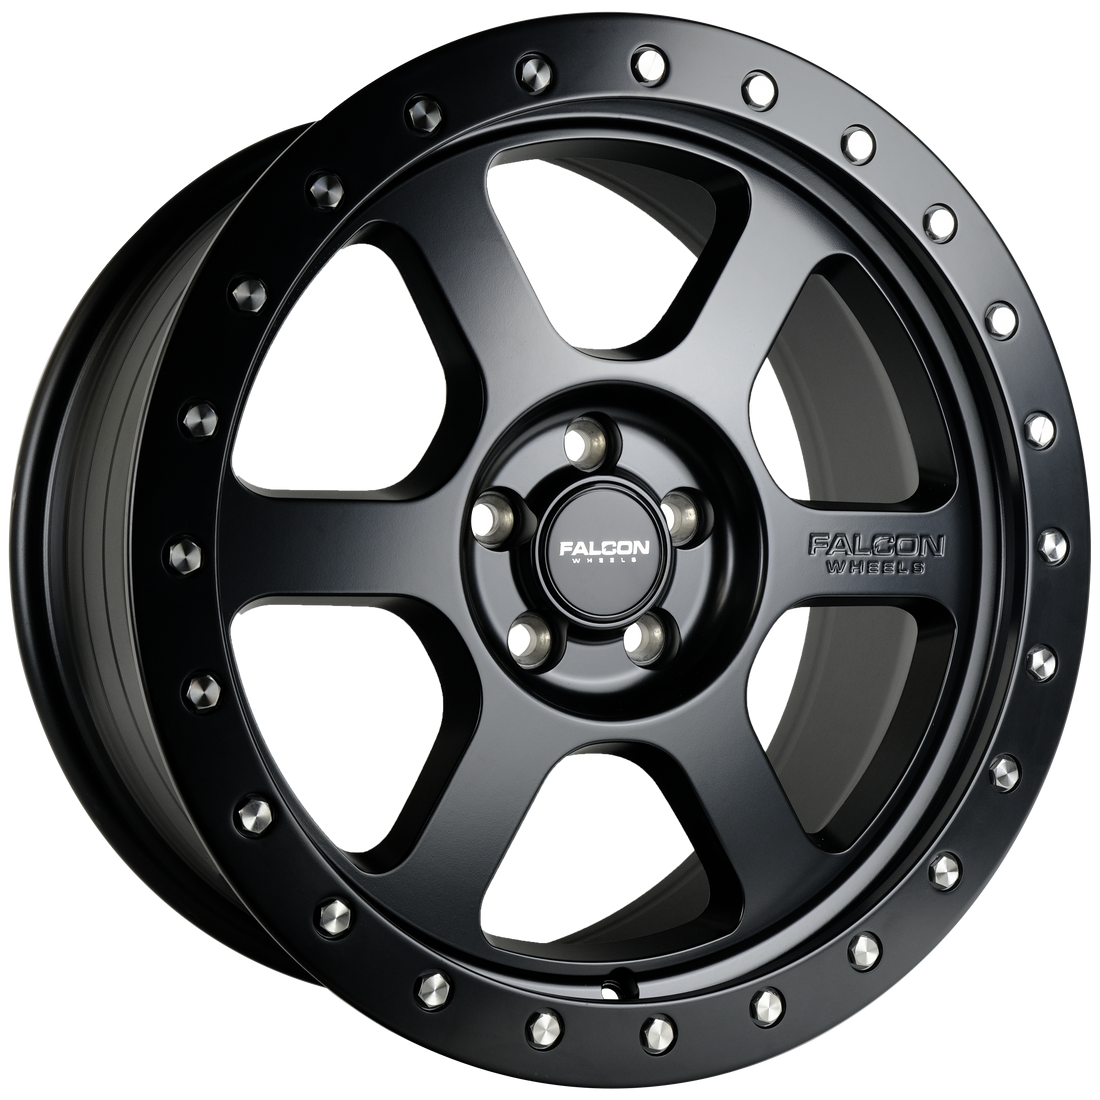 Falcon Wheels V1 17x8 in Matte Black - Roam Overland Outfitters